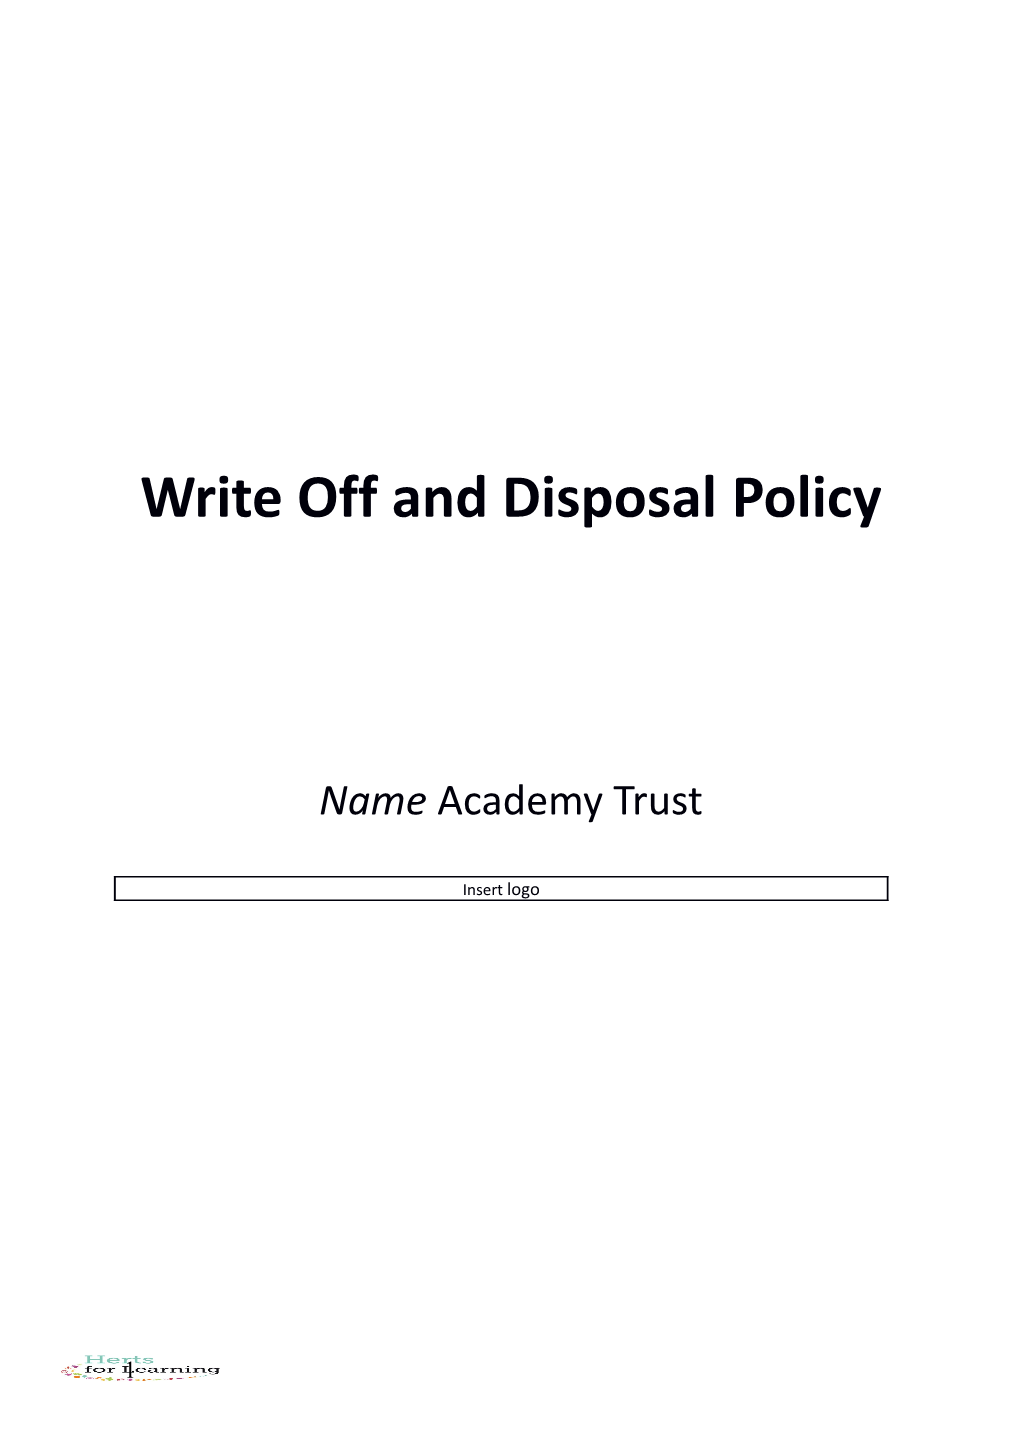 Write Off and Disposal Policy